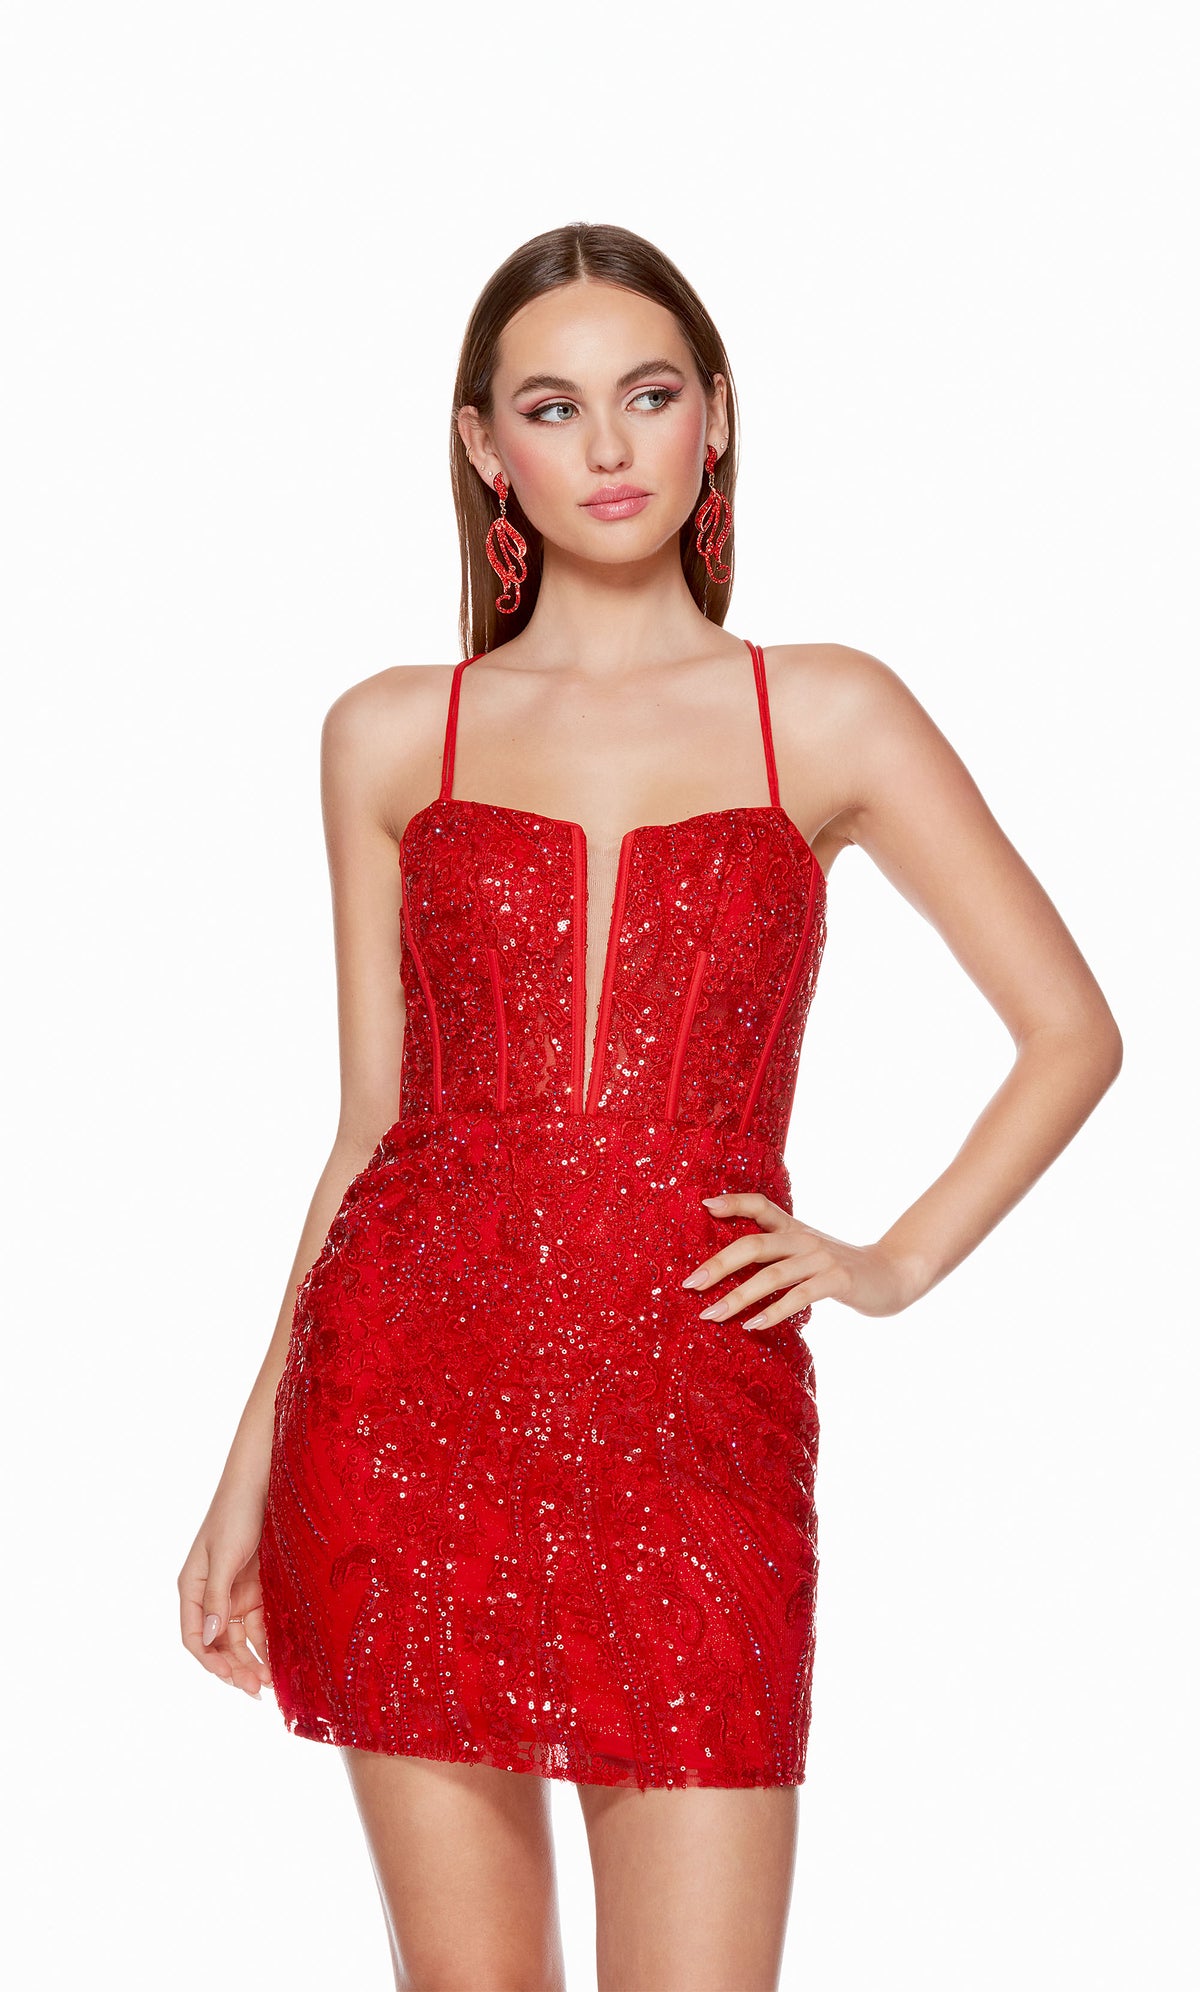 A short, red corset dress with a plunging neckline and fitted silhouette. The dress has a strappy open back and intricate sequin designs throughout.